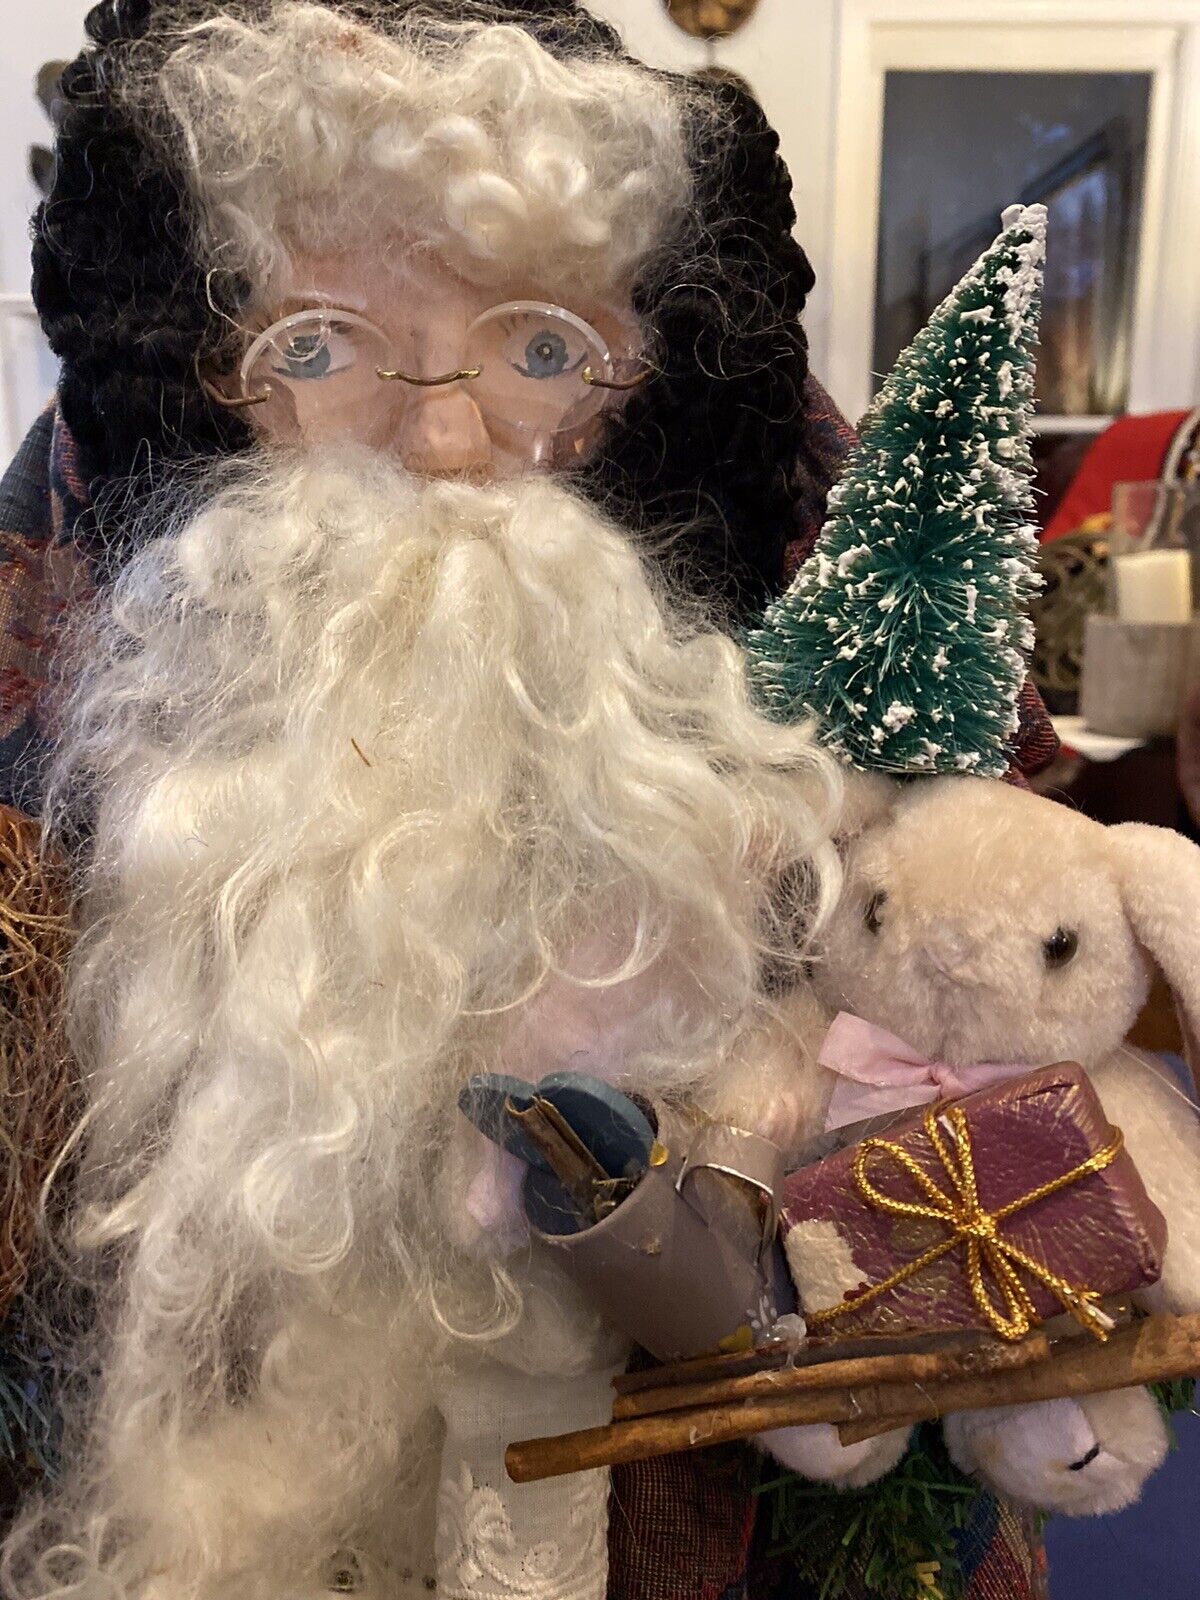 1972 “REFLECTIONS IN TIME” ORIGINAL SANTA #133/300, Saks 5th Ave. 50 Yrs. 19”